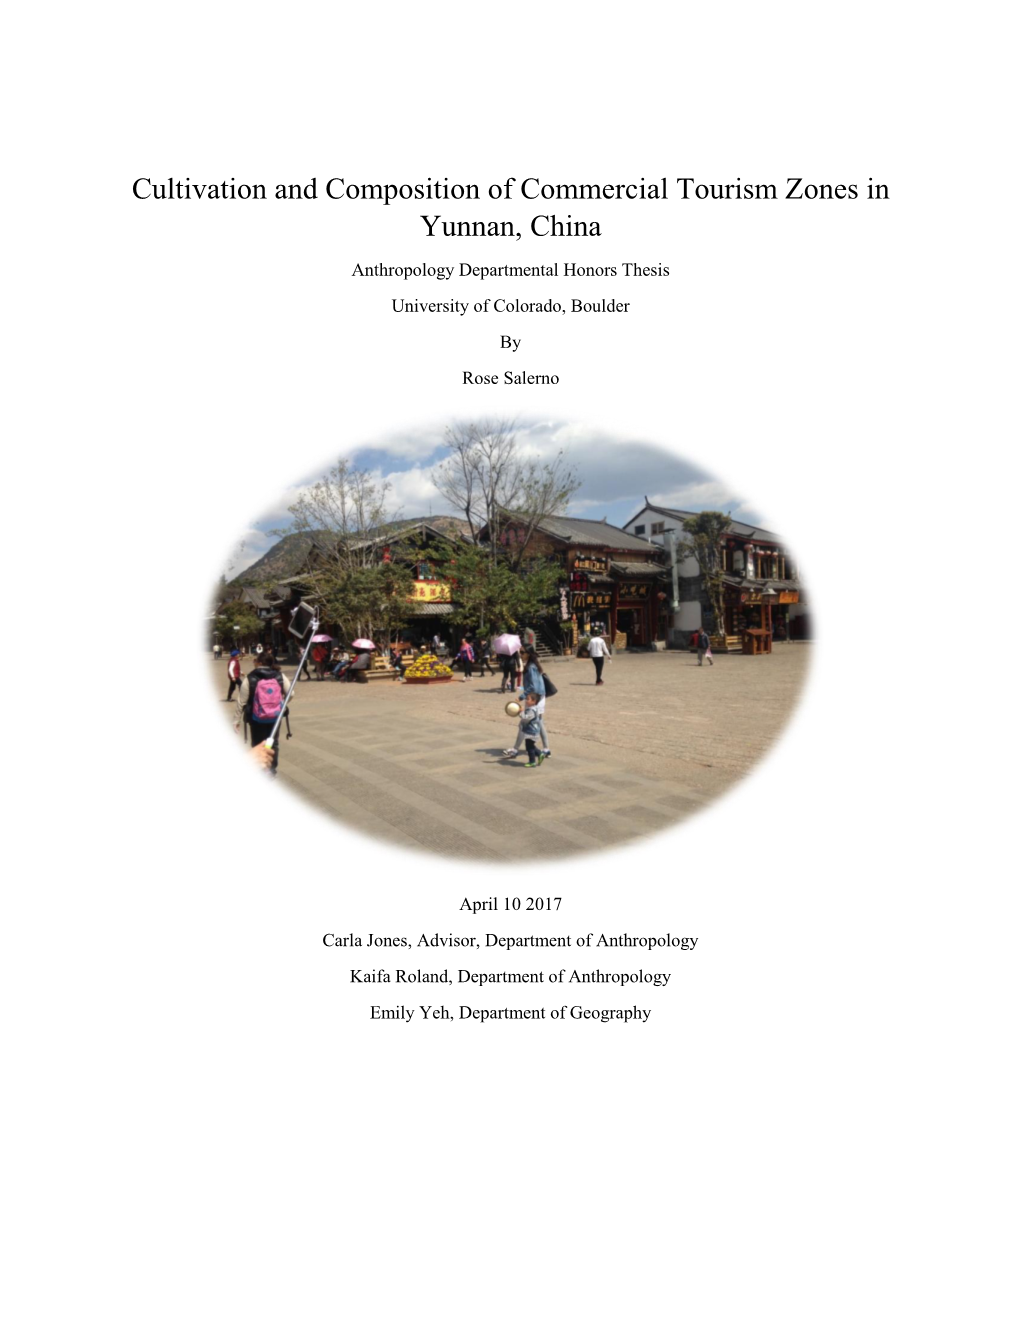 Cultivation and Composition of Commercial Tourism Zones in Yunnan, China